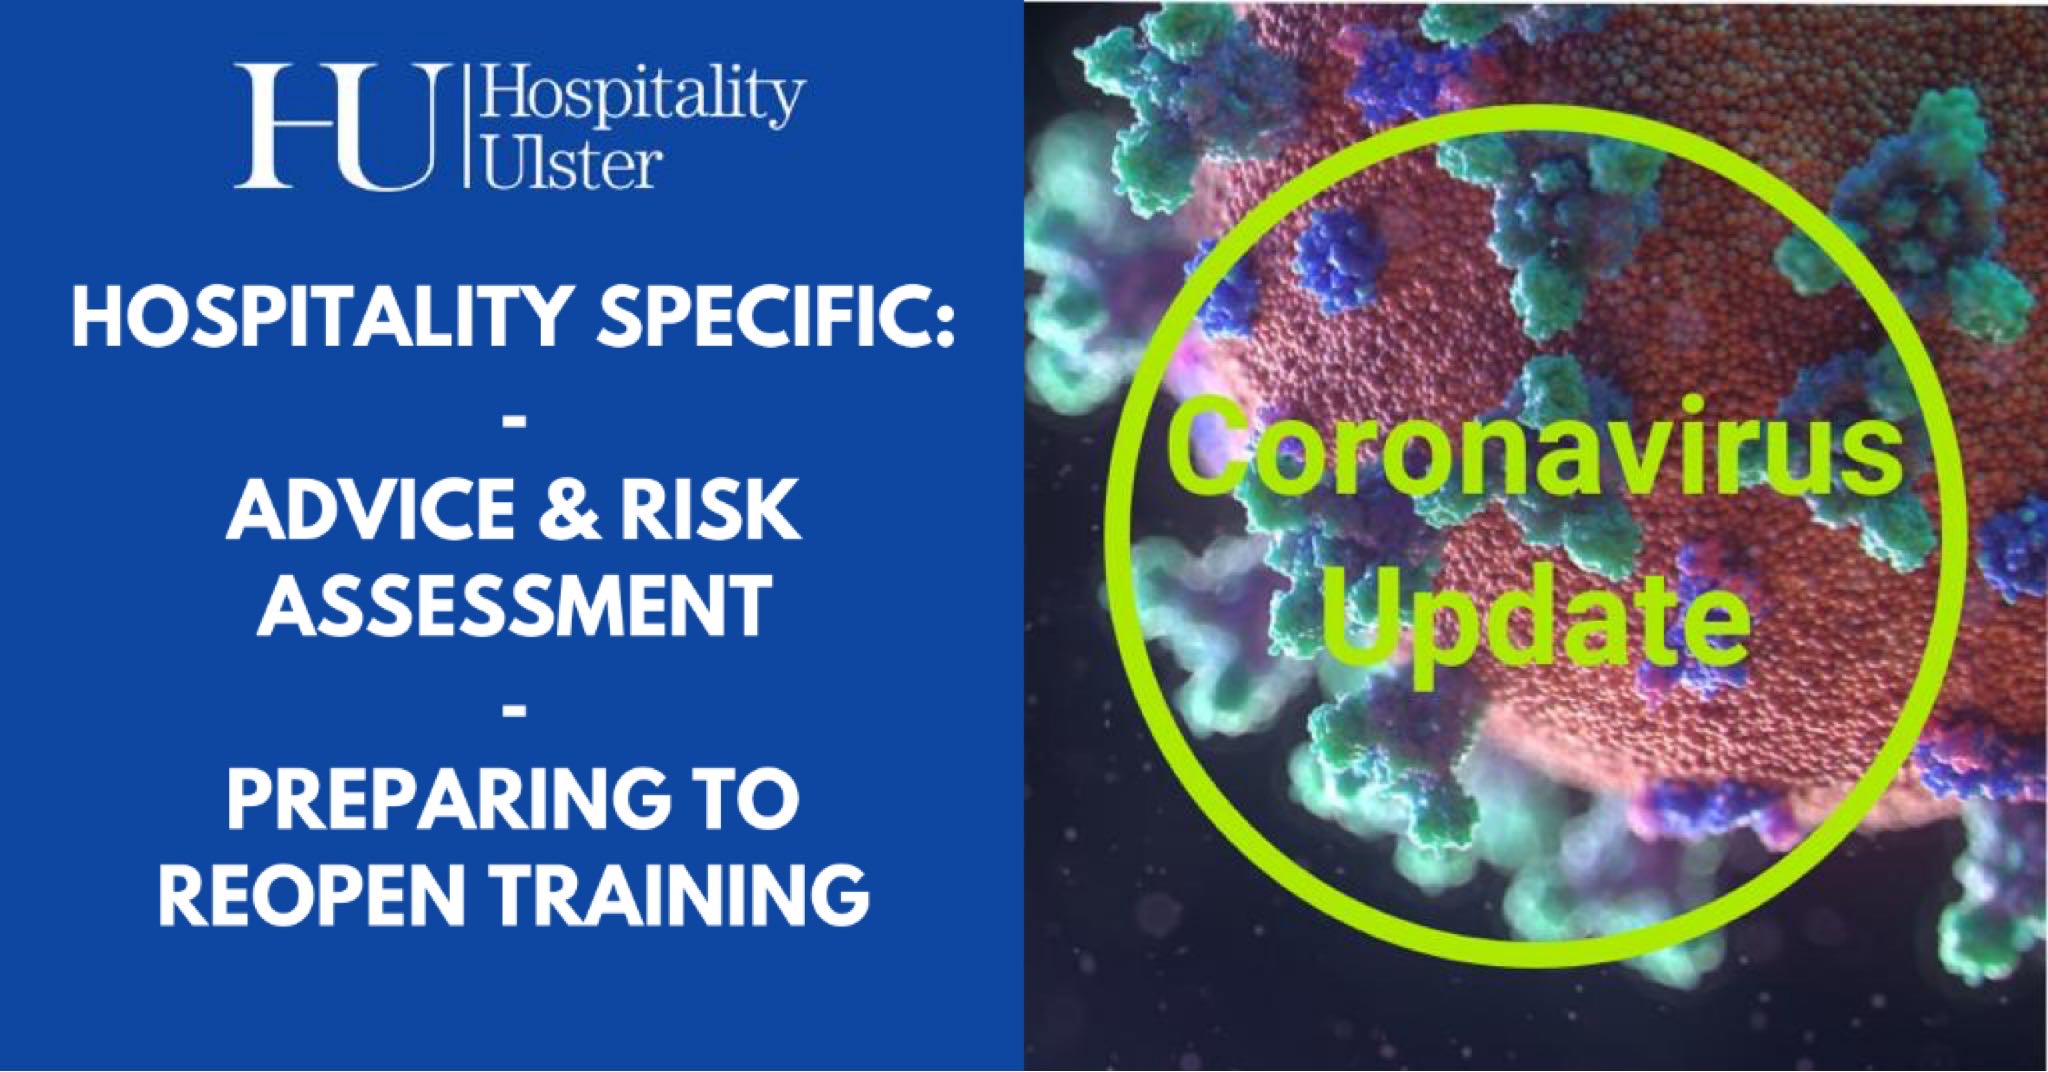 HOSPITALITY SPECIFIC COVID ADVICE AND RISK ASSESSMENT PLUS ...